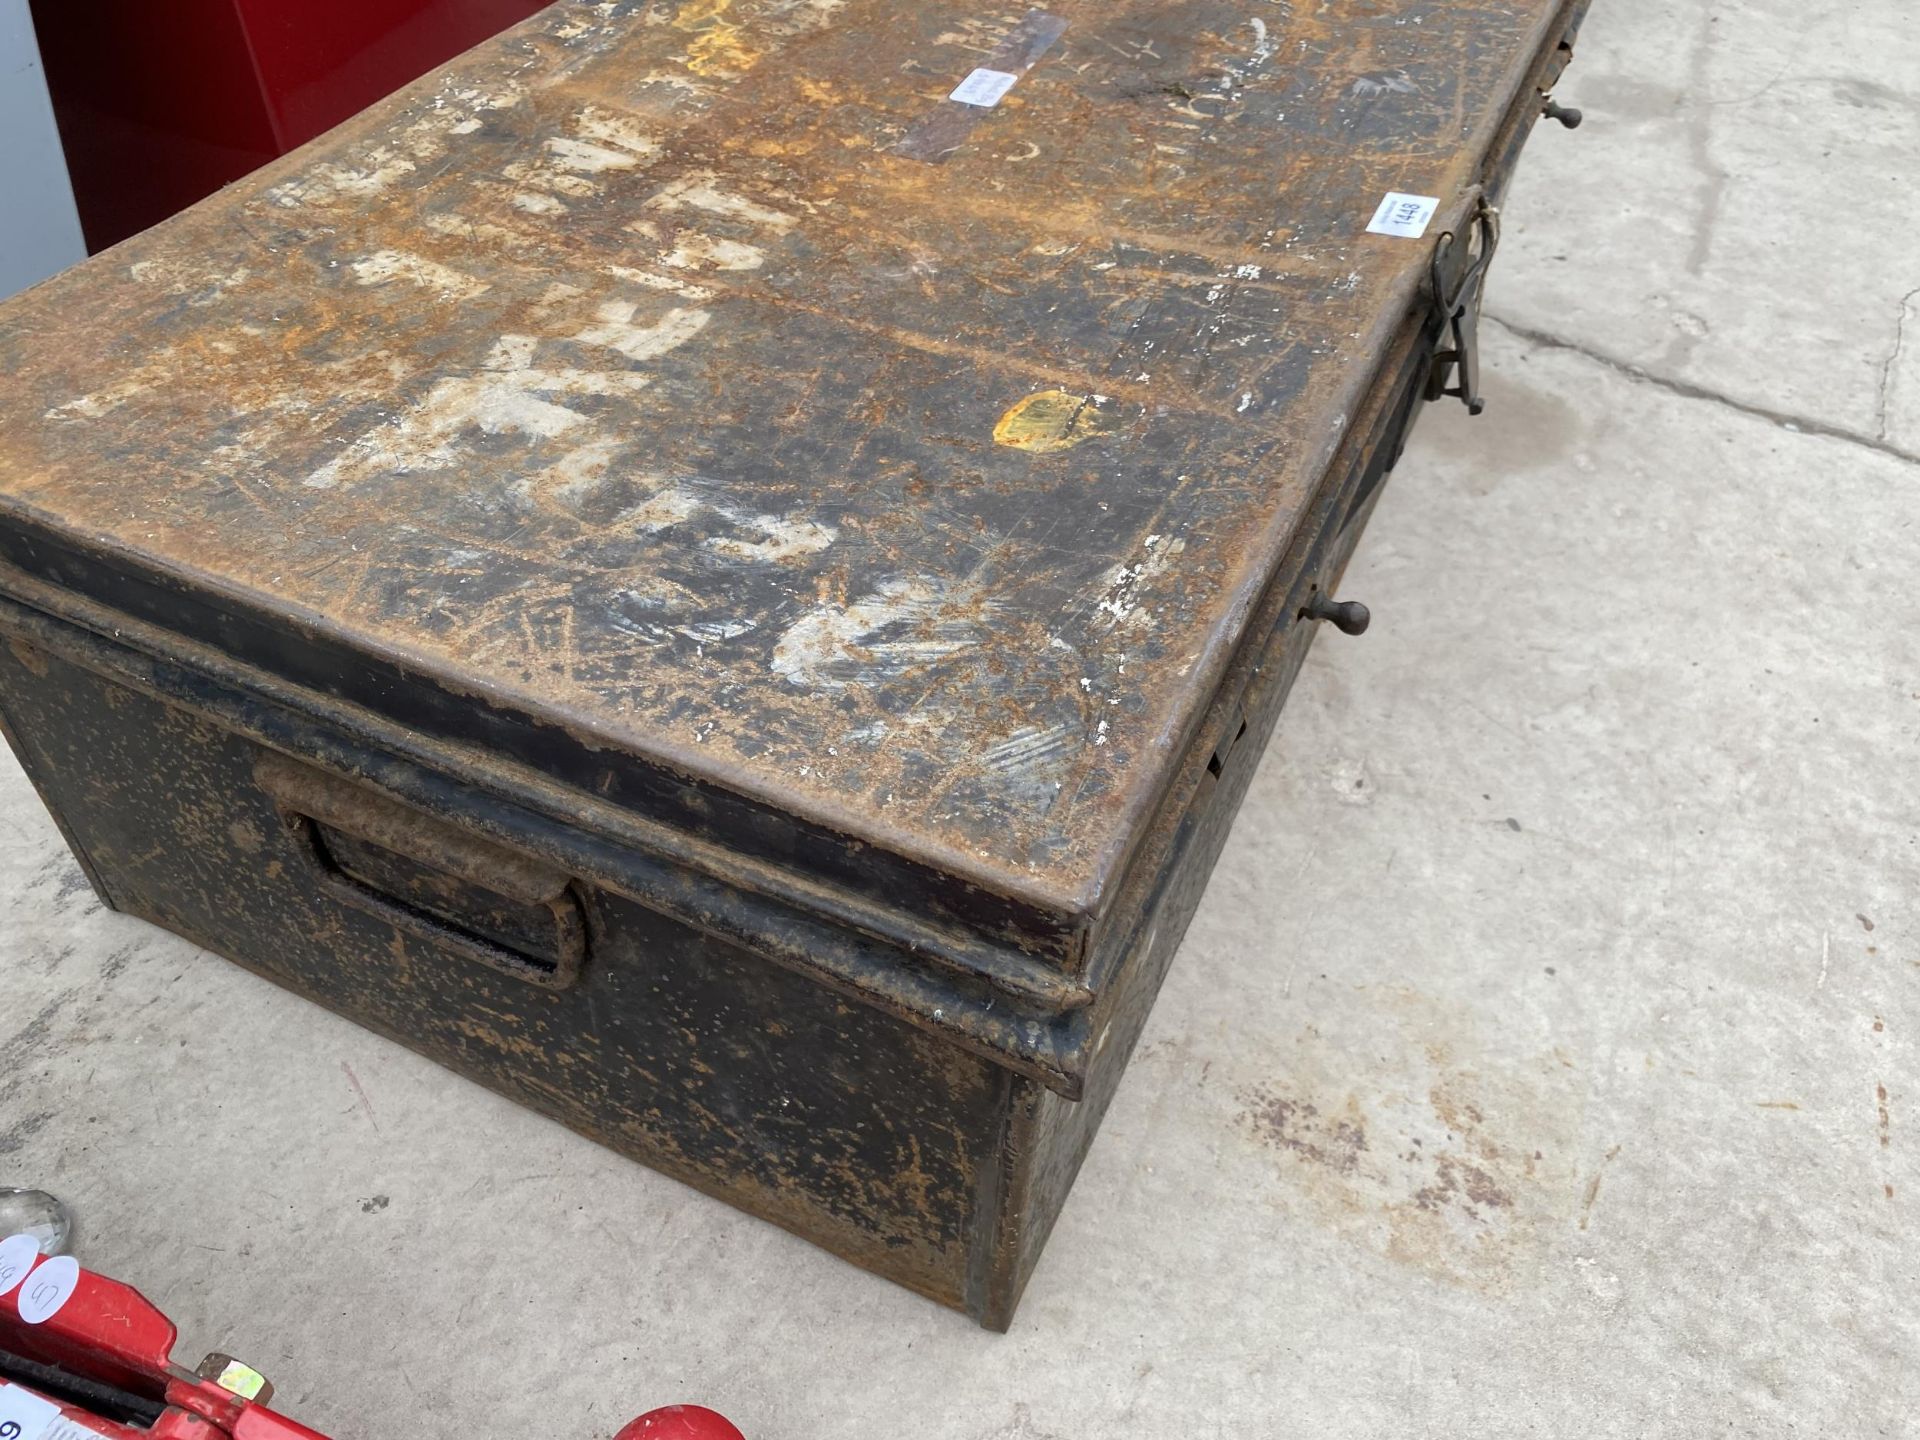 A VINTAGE METAL STORAGE TRUNK WITH CARRY HANDLES AND CLASP - Image 2 of 3